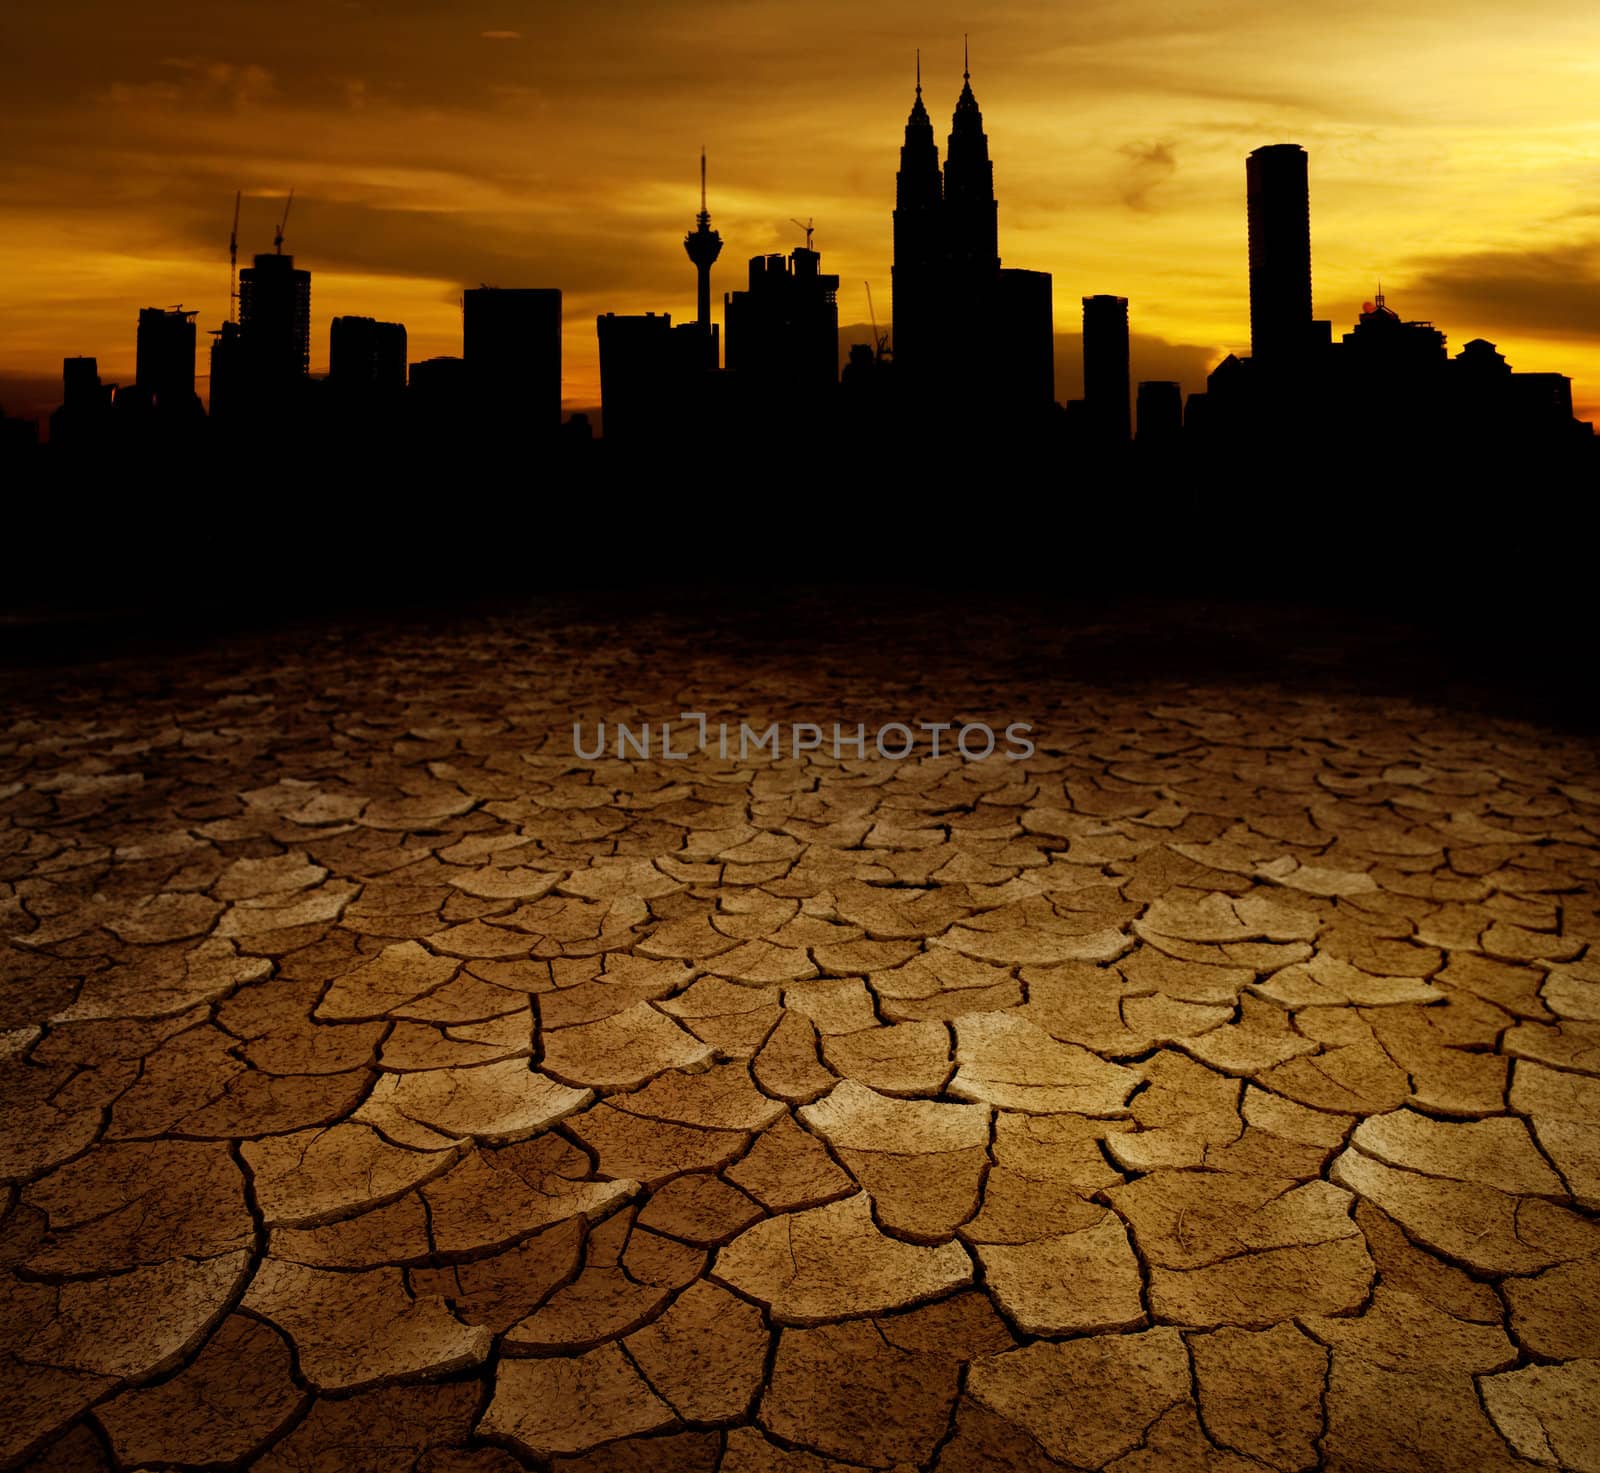 Global Warming Concept Image by szefei